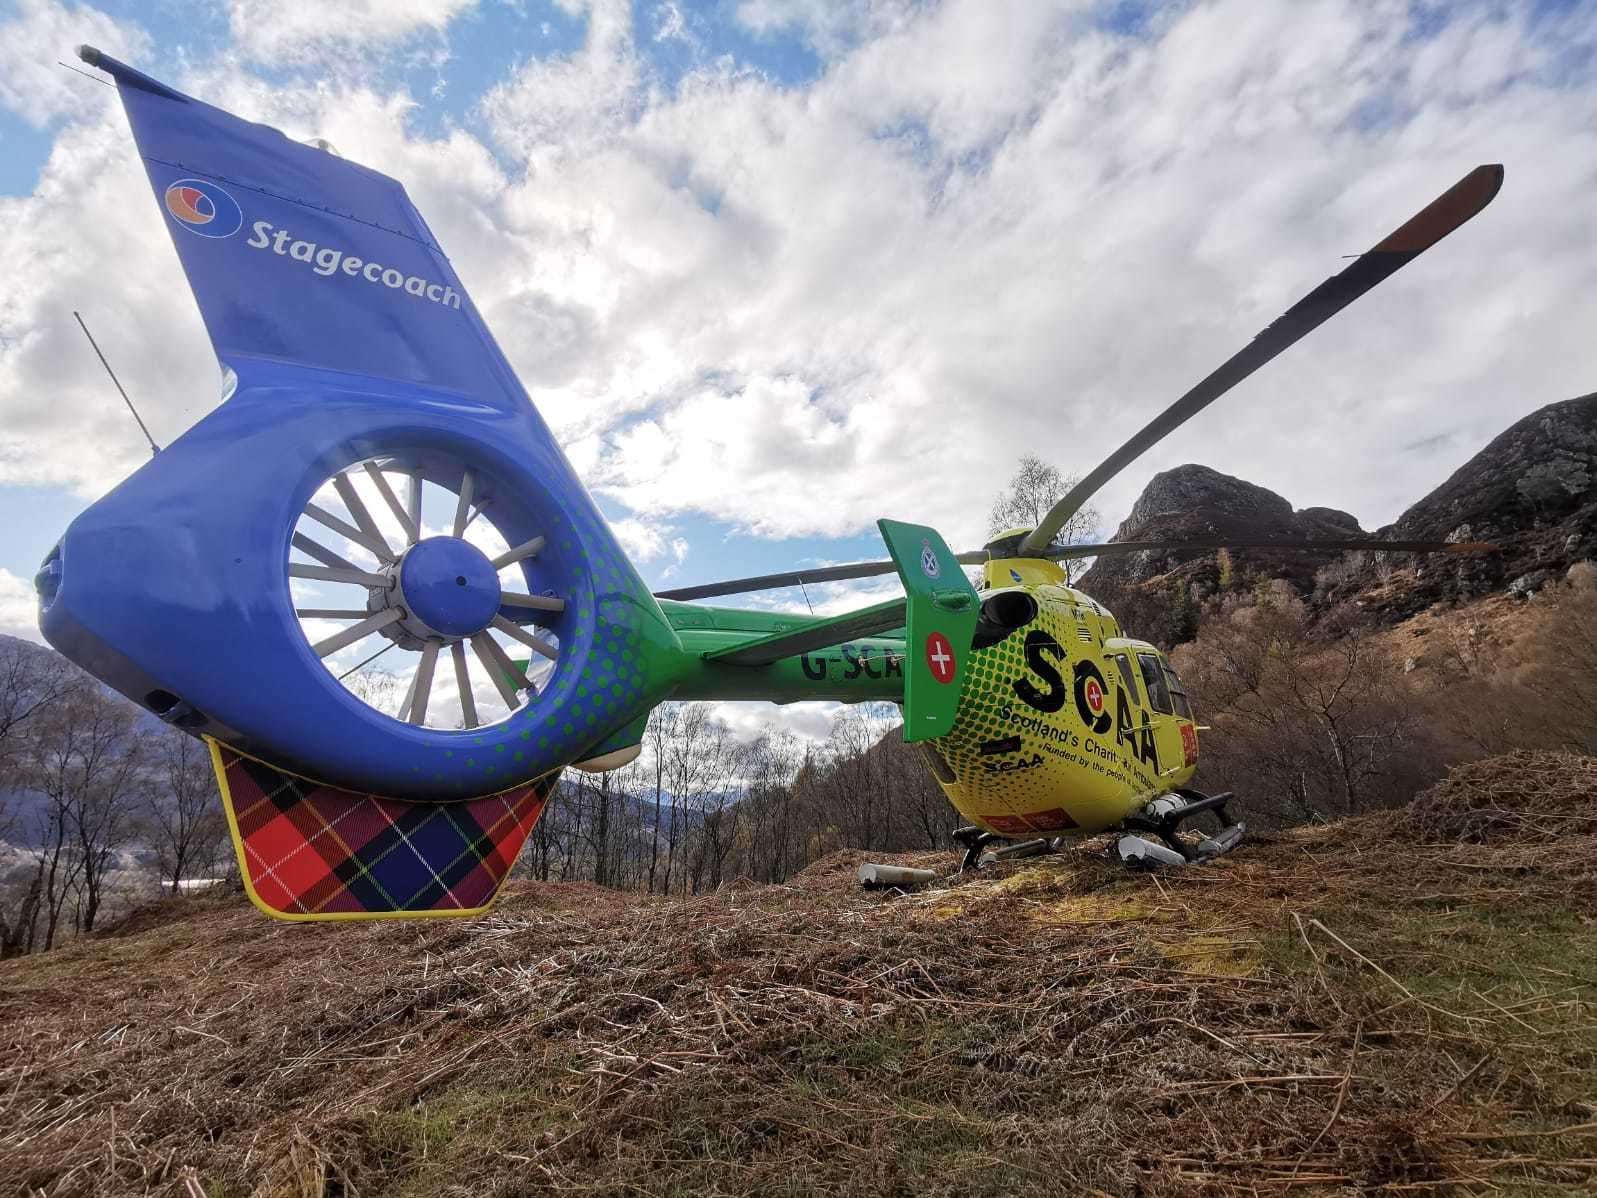 People can donate to place their names on the Scotland’s Charity Air Ambulance's helicopters.